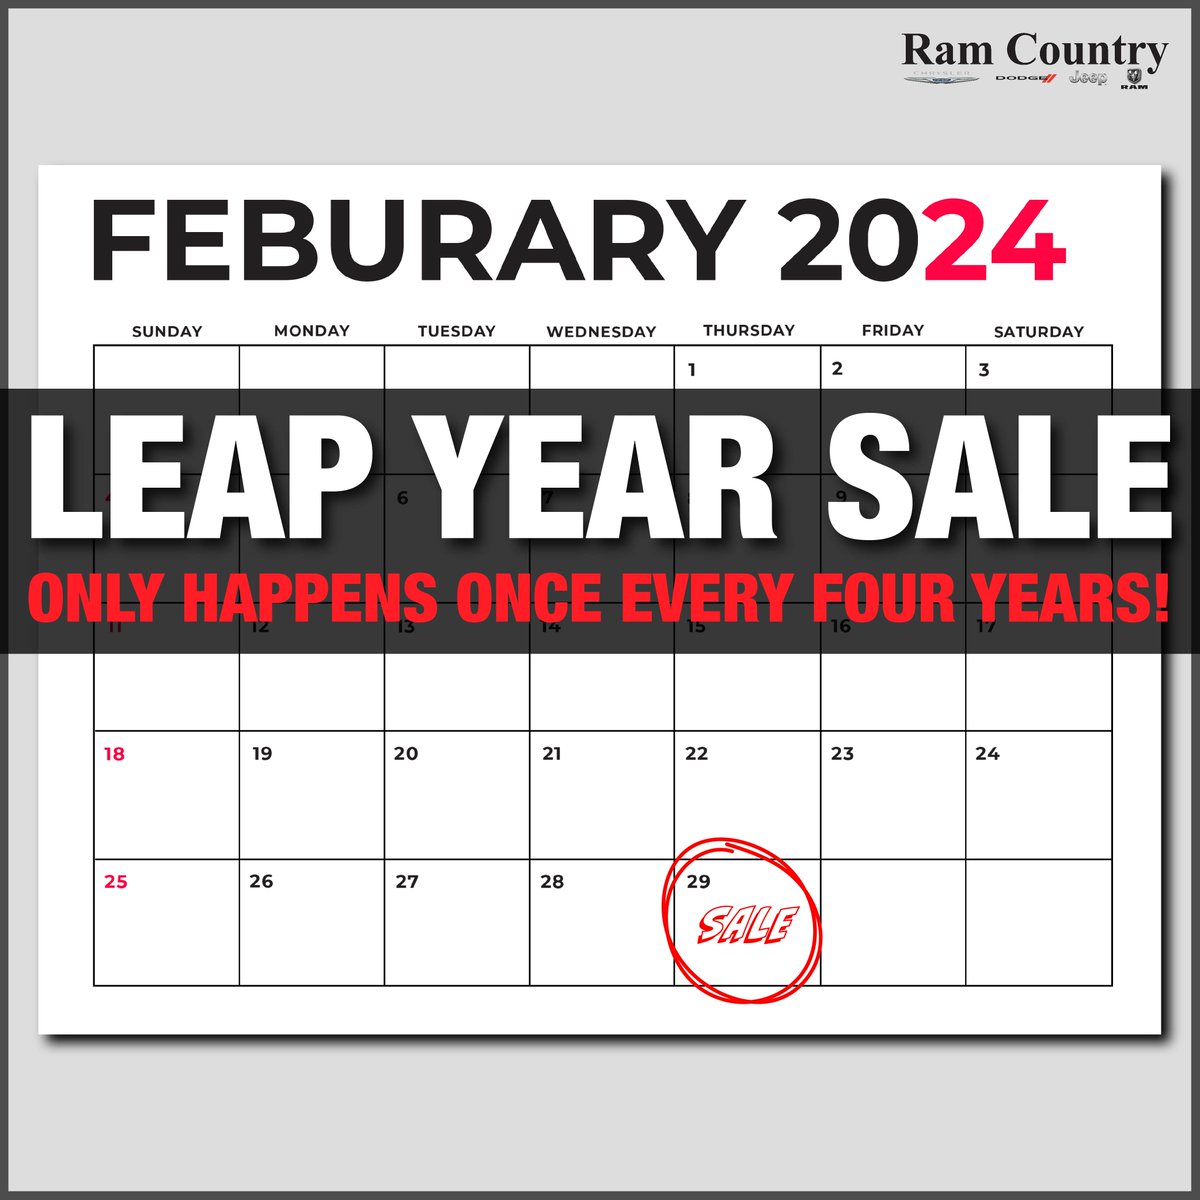 It's February 29th and we are having a Leap Year Sale! 🤩 It only happens ONCE EVERY FOUR YEARS, so don't miss your chance to save BIG on your next vehicle! #ramcountrydumas #ramcountry #dumastx #leapyear #sale